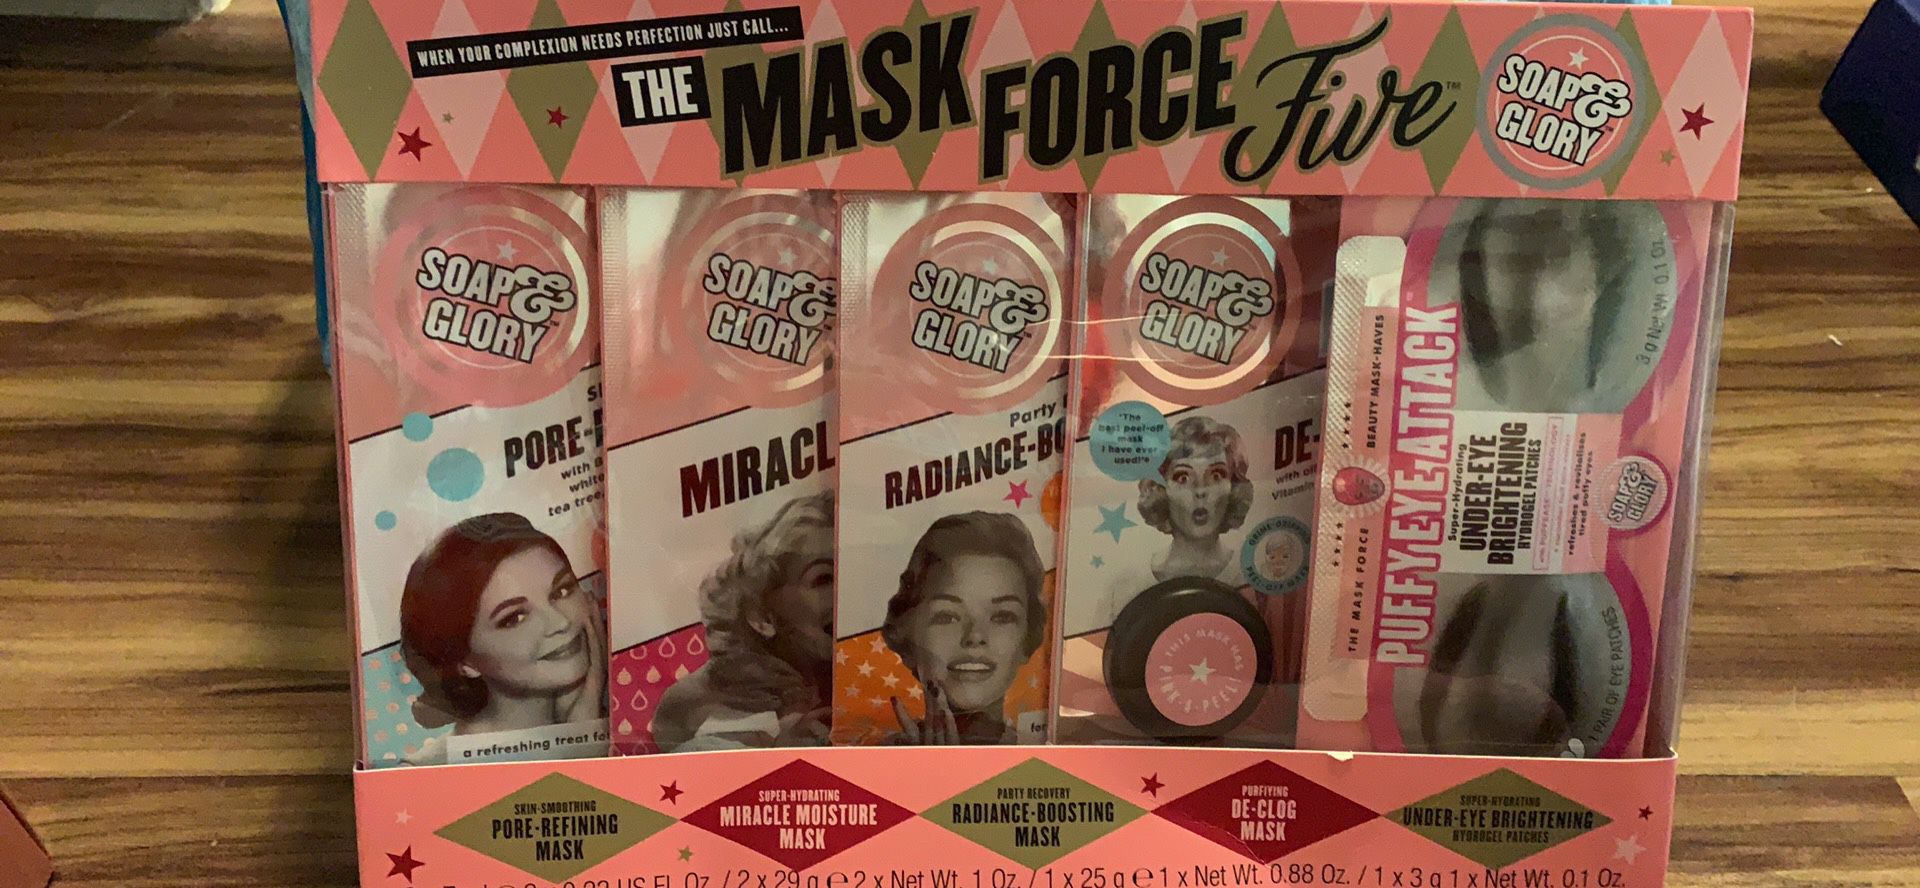 Soap and glory face masks